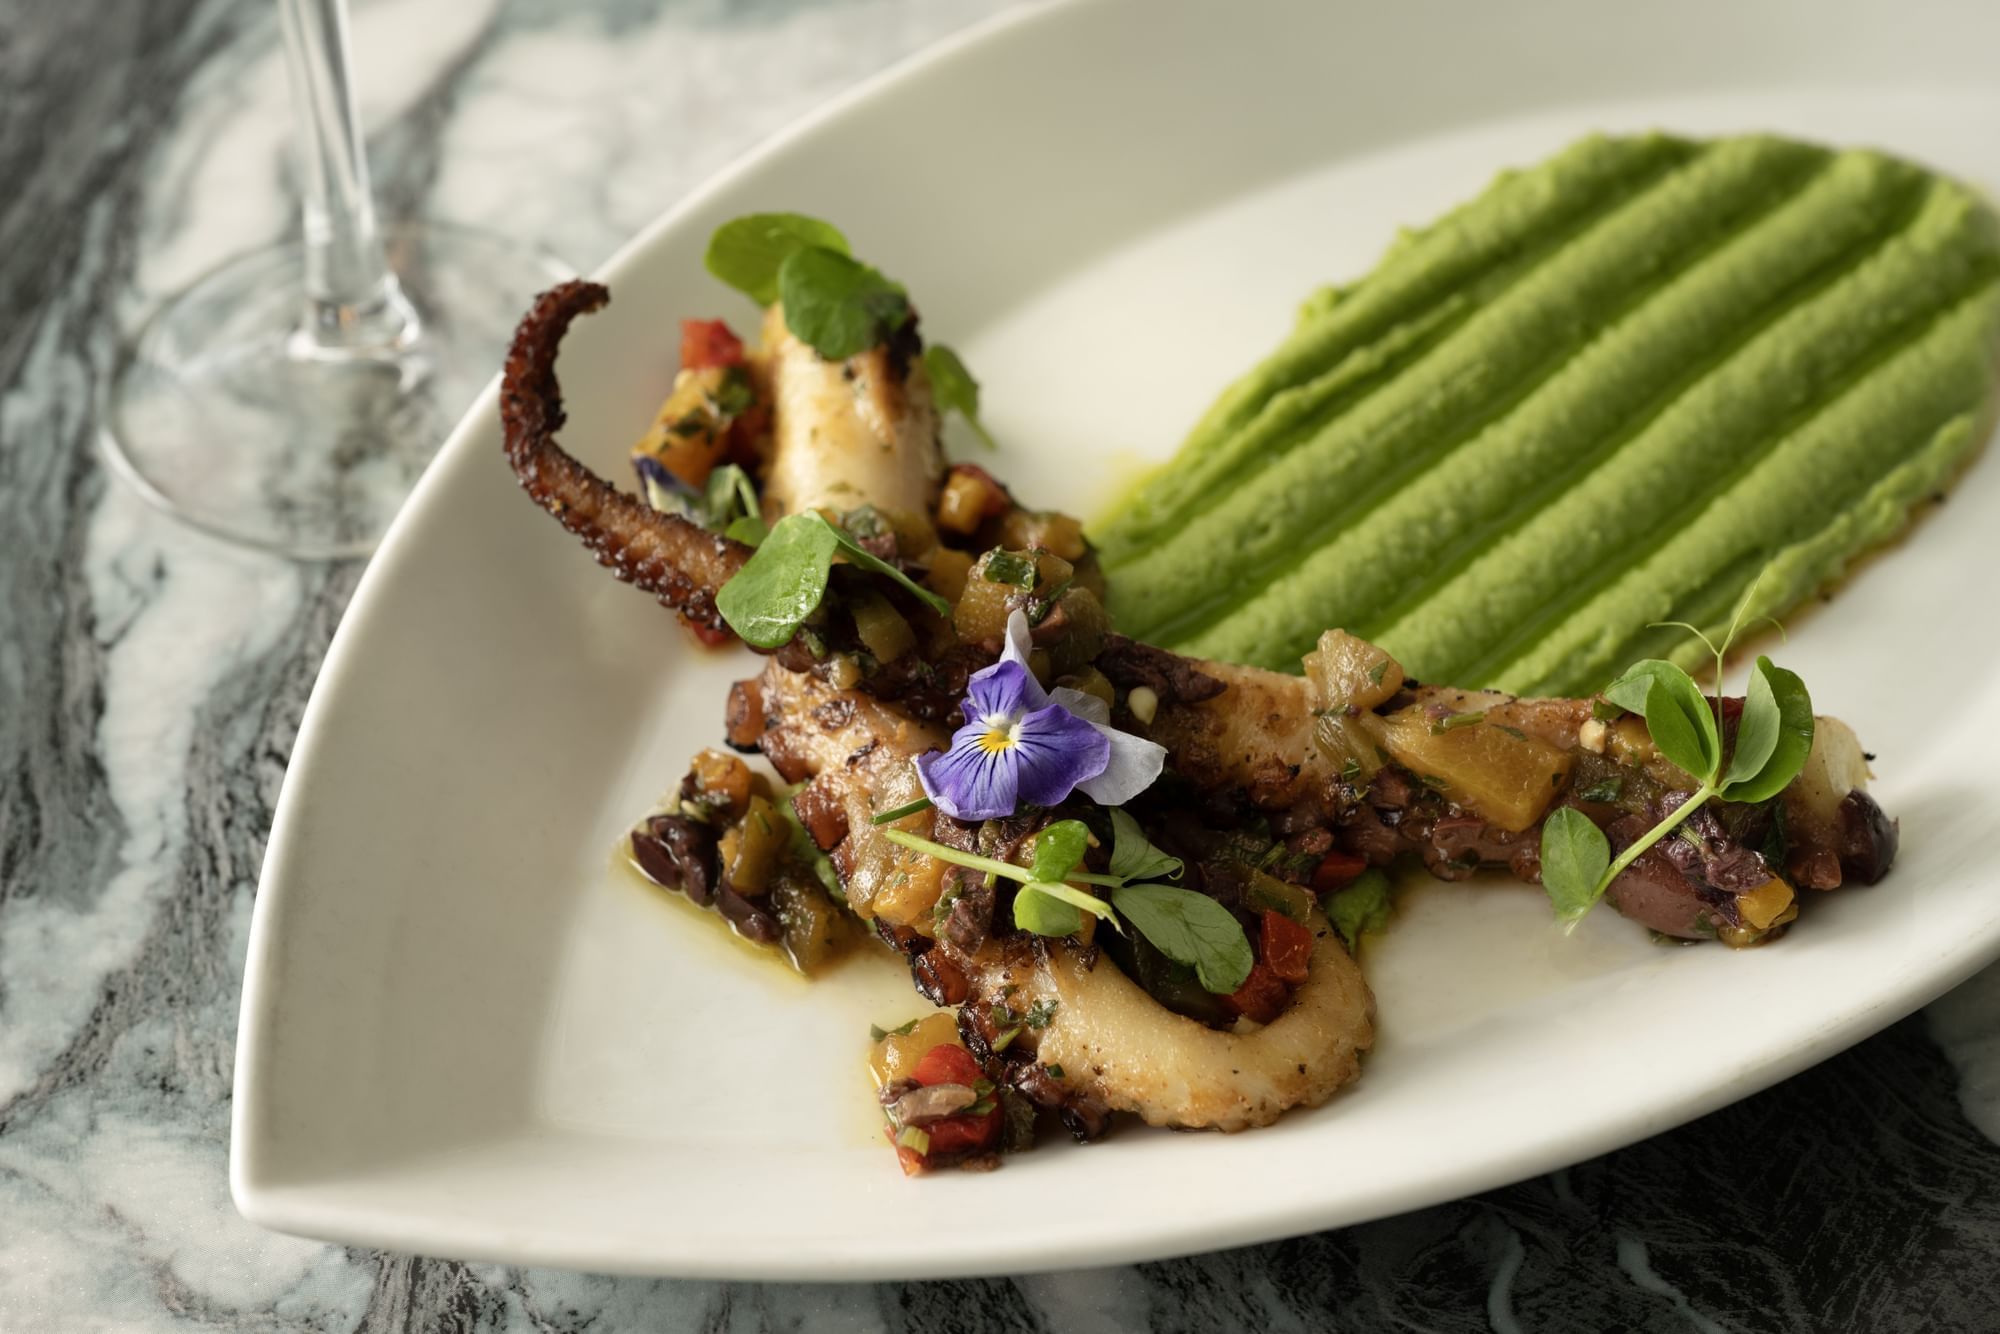 Octopus with a green sauce